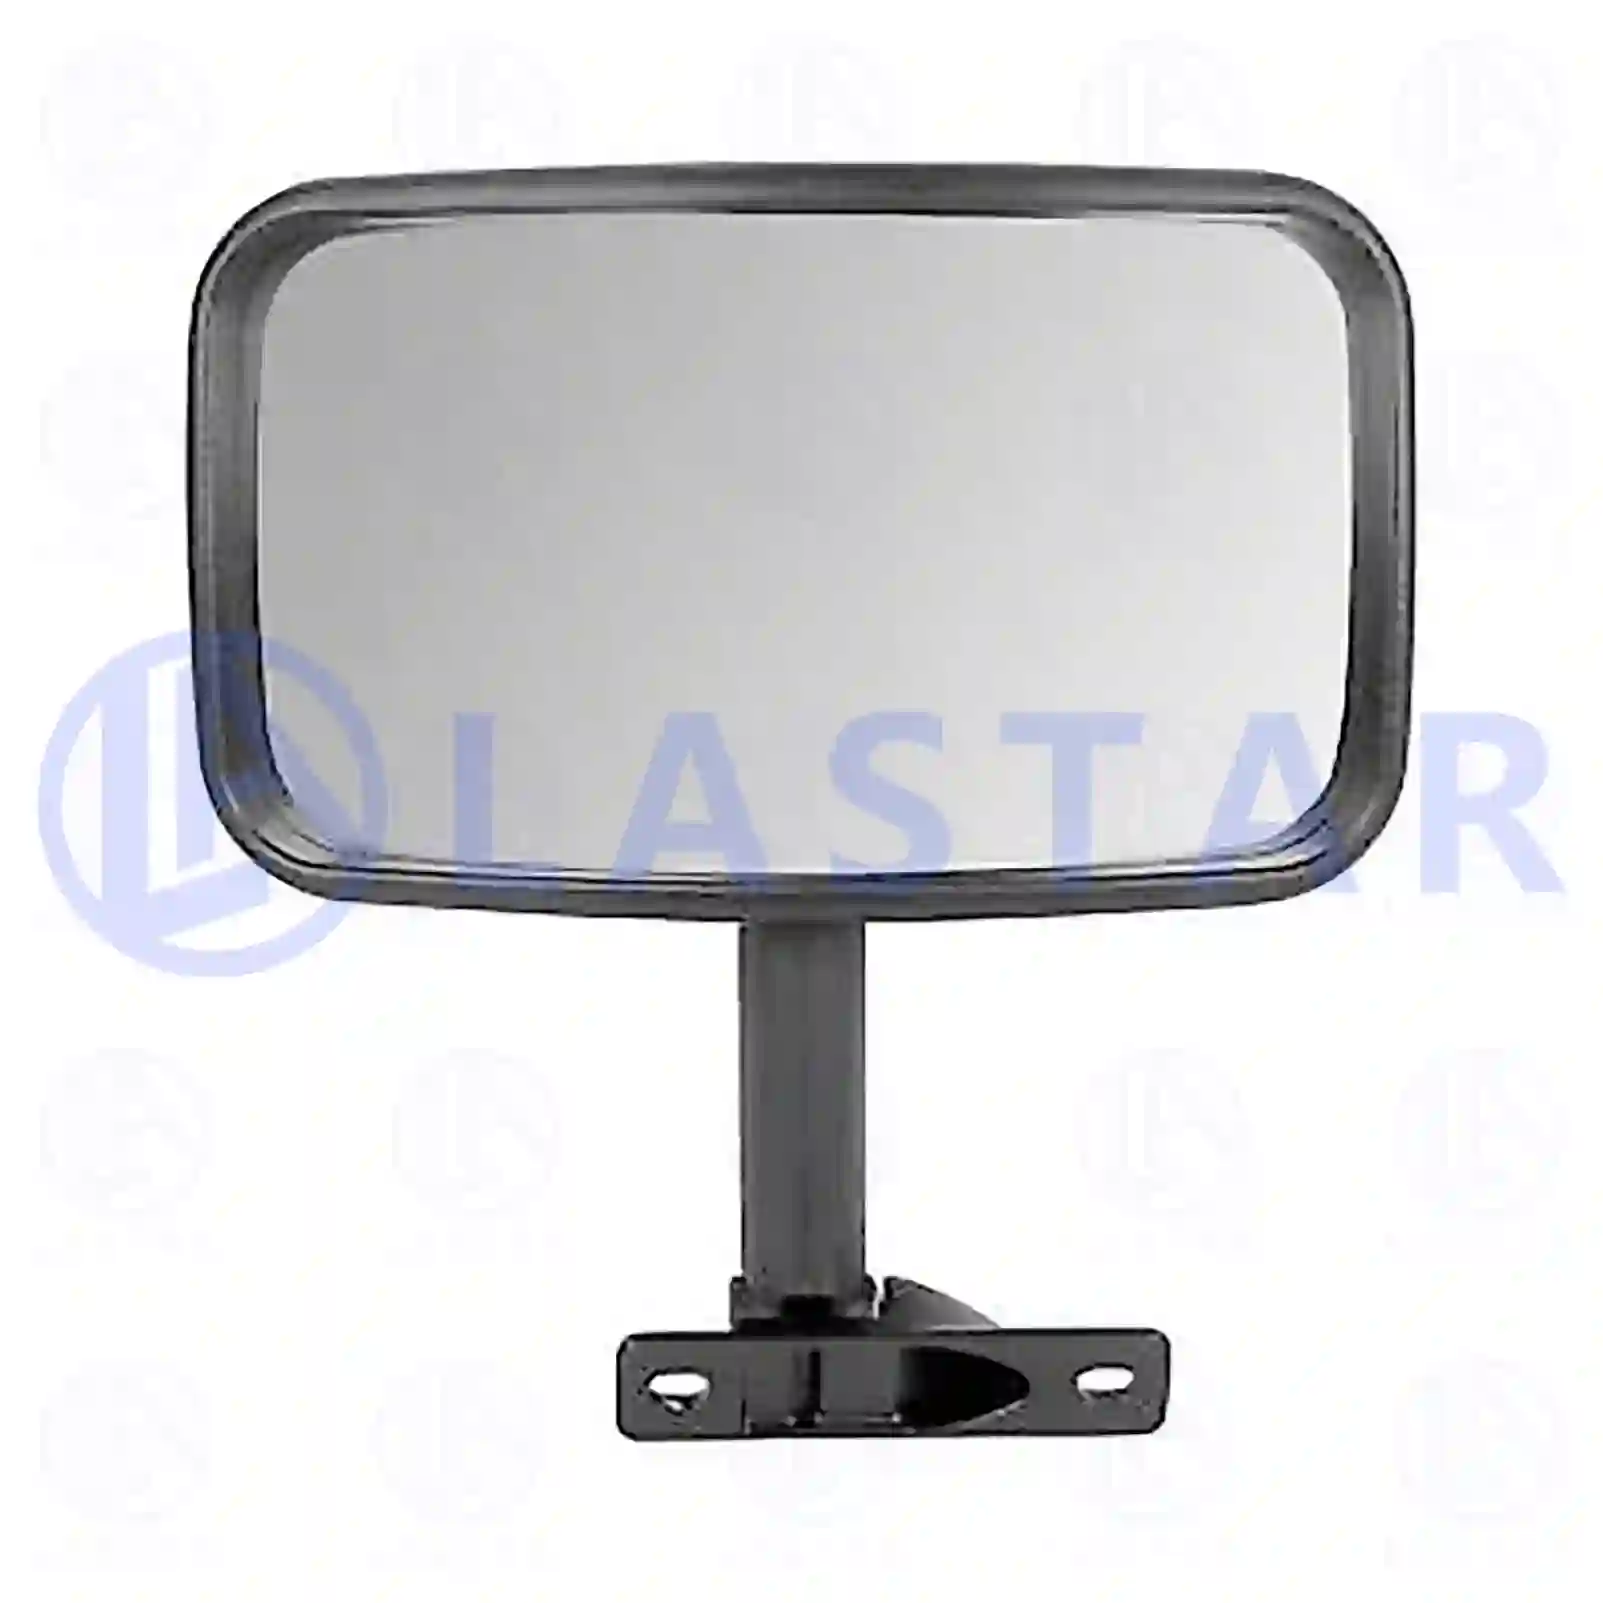 Kerb observation mirror, heated, 77721243, 21203313S2, , , ||  77721243 Lastar Spare Part | Truck Spare Parts, Auotomotive Spare Parts Kerb observation mirror, heated, 77721243, 21203313S2, , , ||  77721243 Lastar Spare Part | Truck Spare Parts, Auotomotive Spare Parts